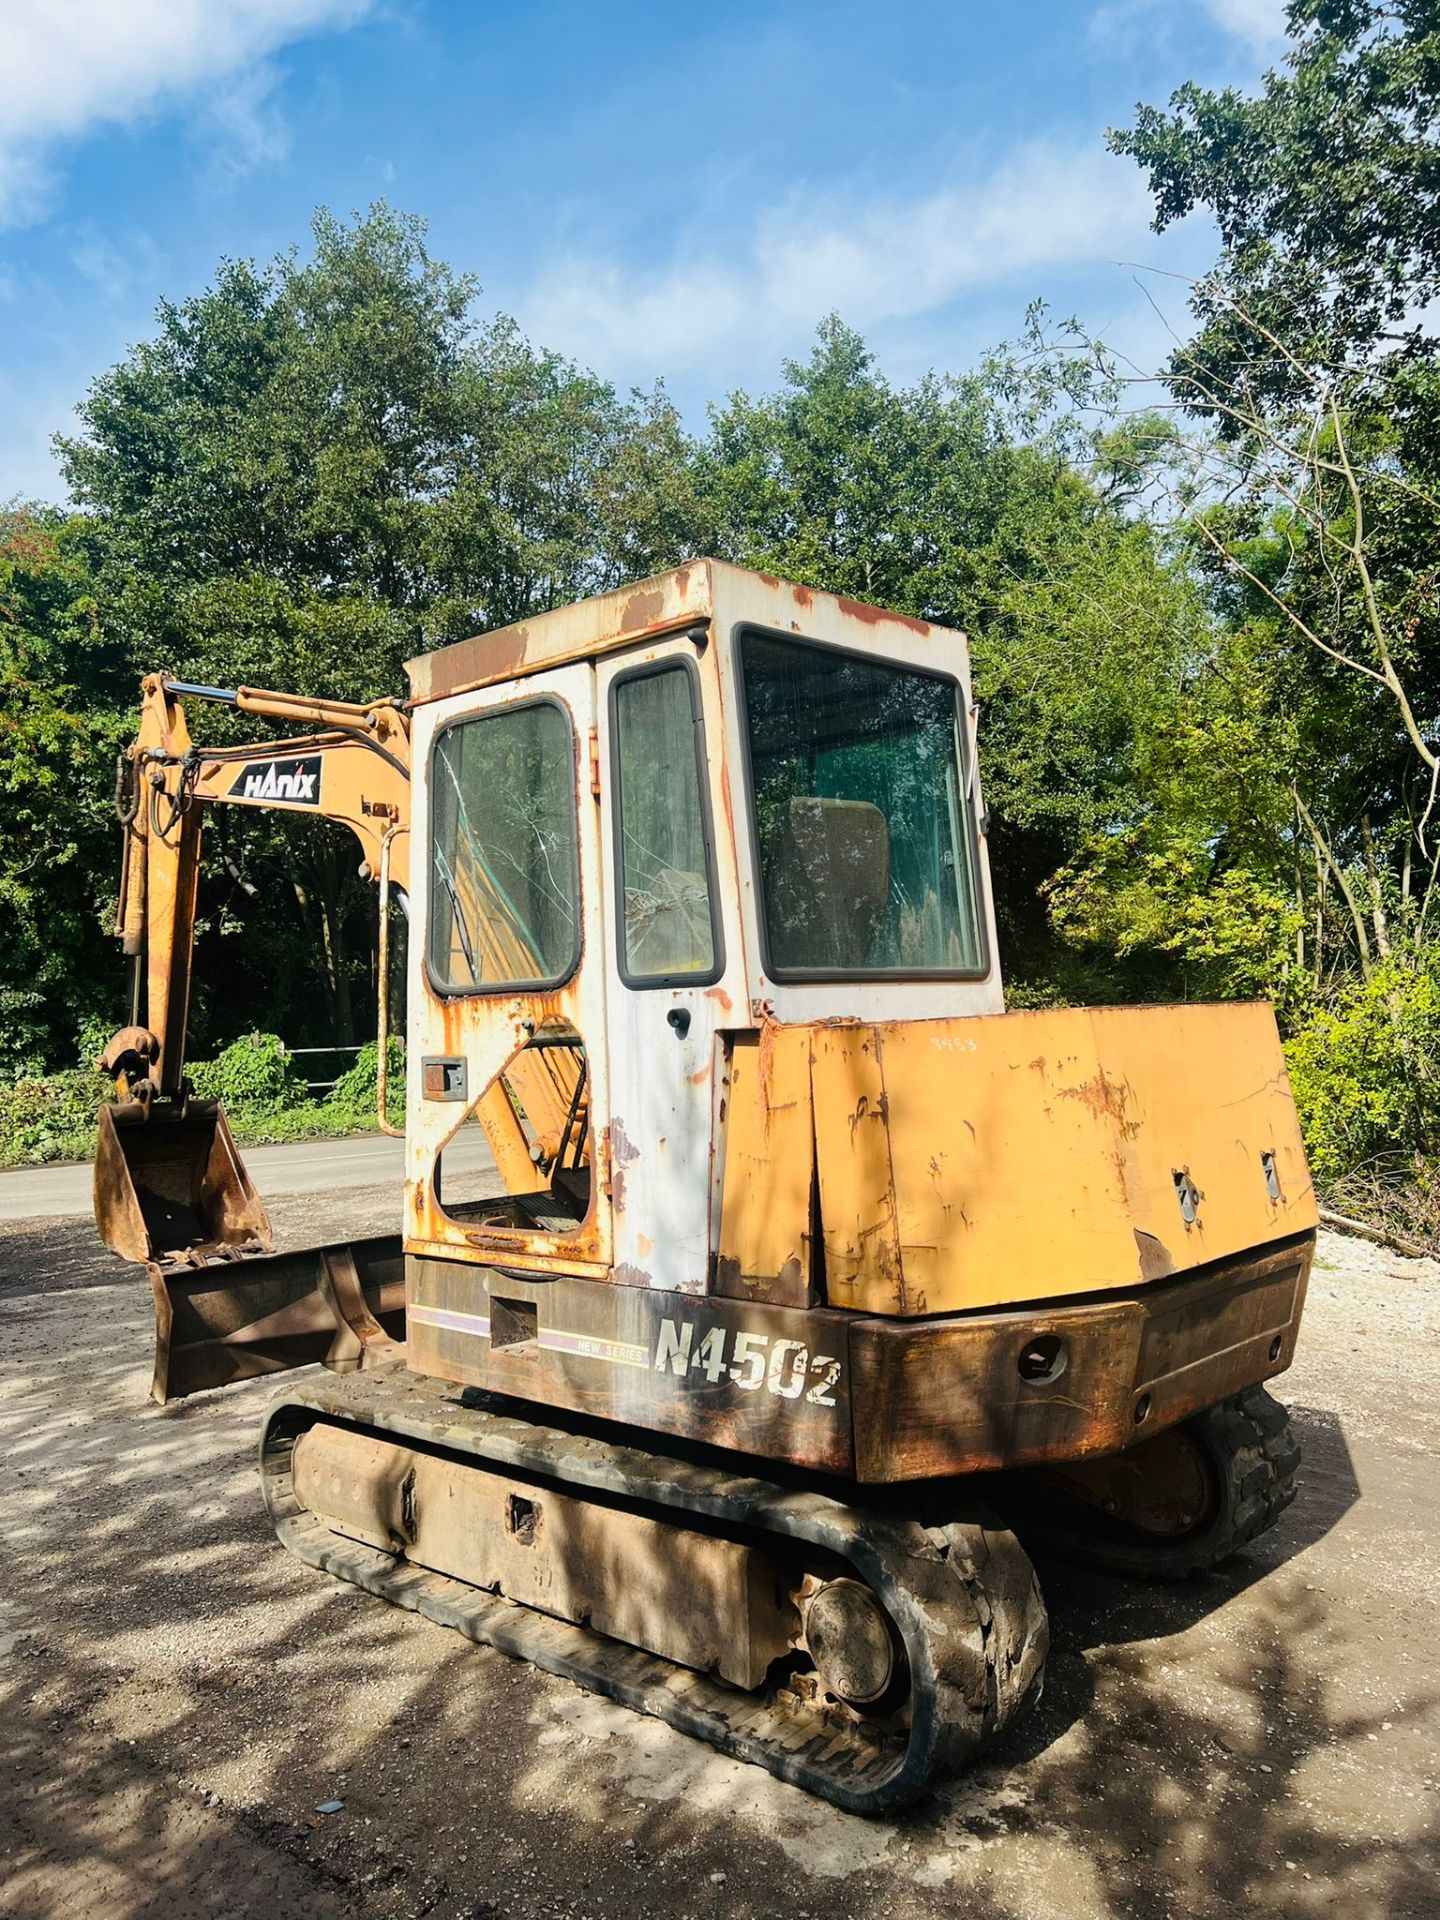 HANIX N450-2 tracked excavator 4.5 TON - RUNS DRIVES AND DIGS *PLUS VAT* - Image 4 of 8